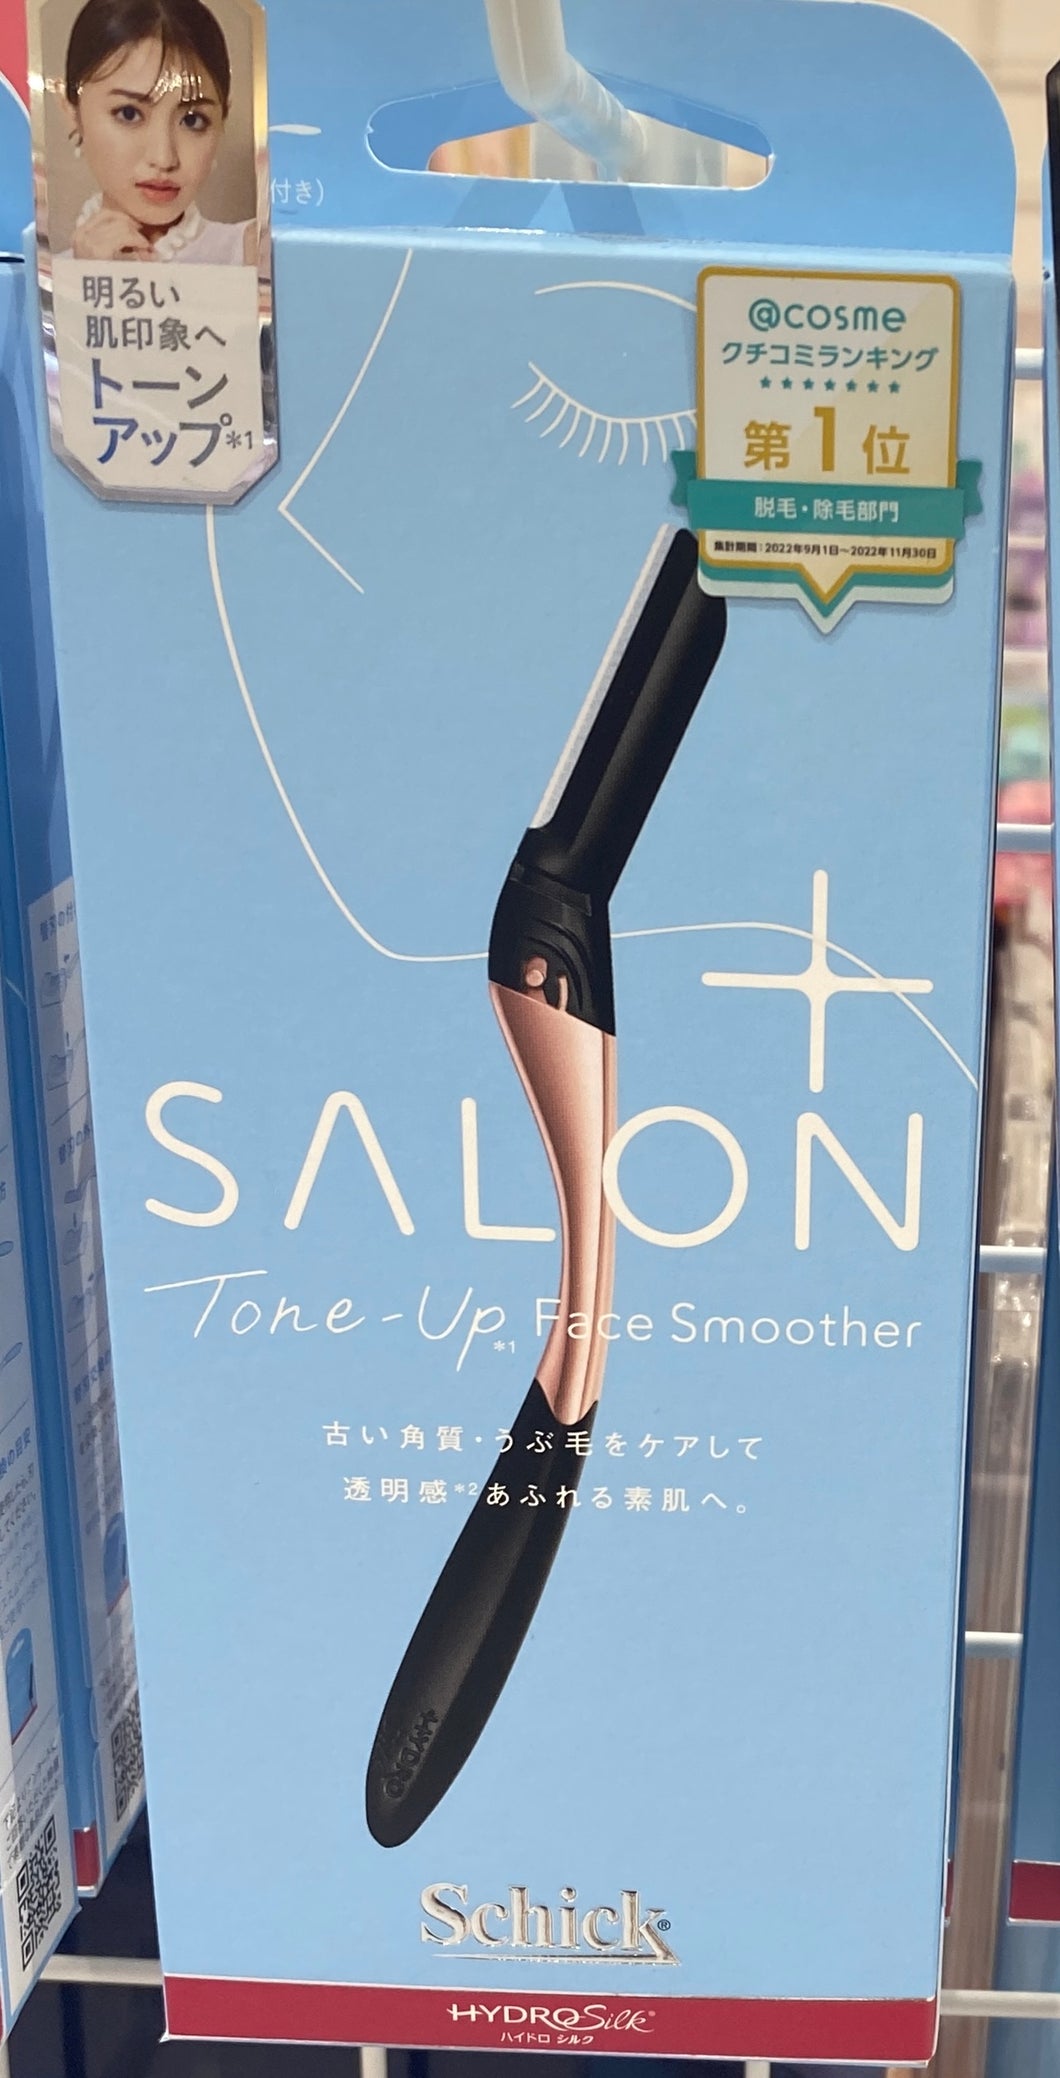 Salon tone-up Face Smoother除面毛/唇毛器(cosme第1位）